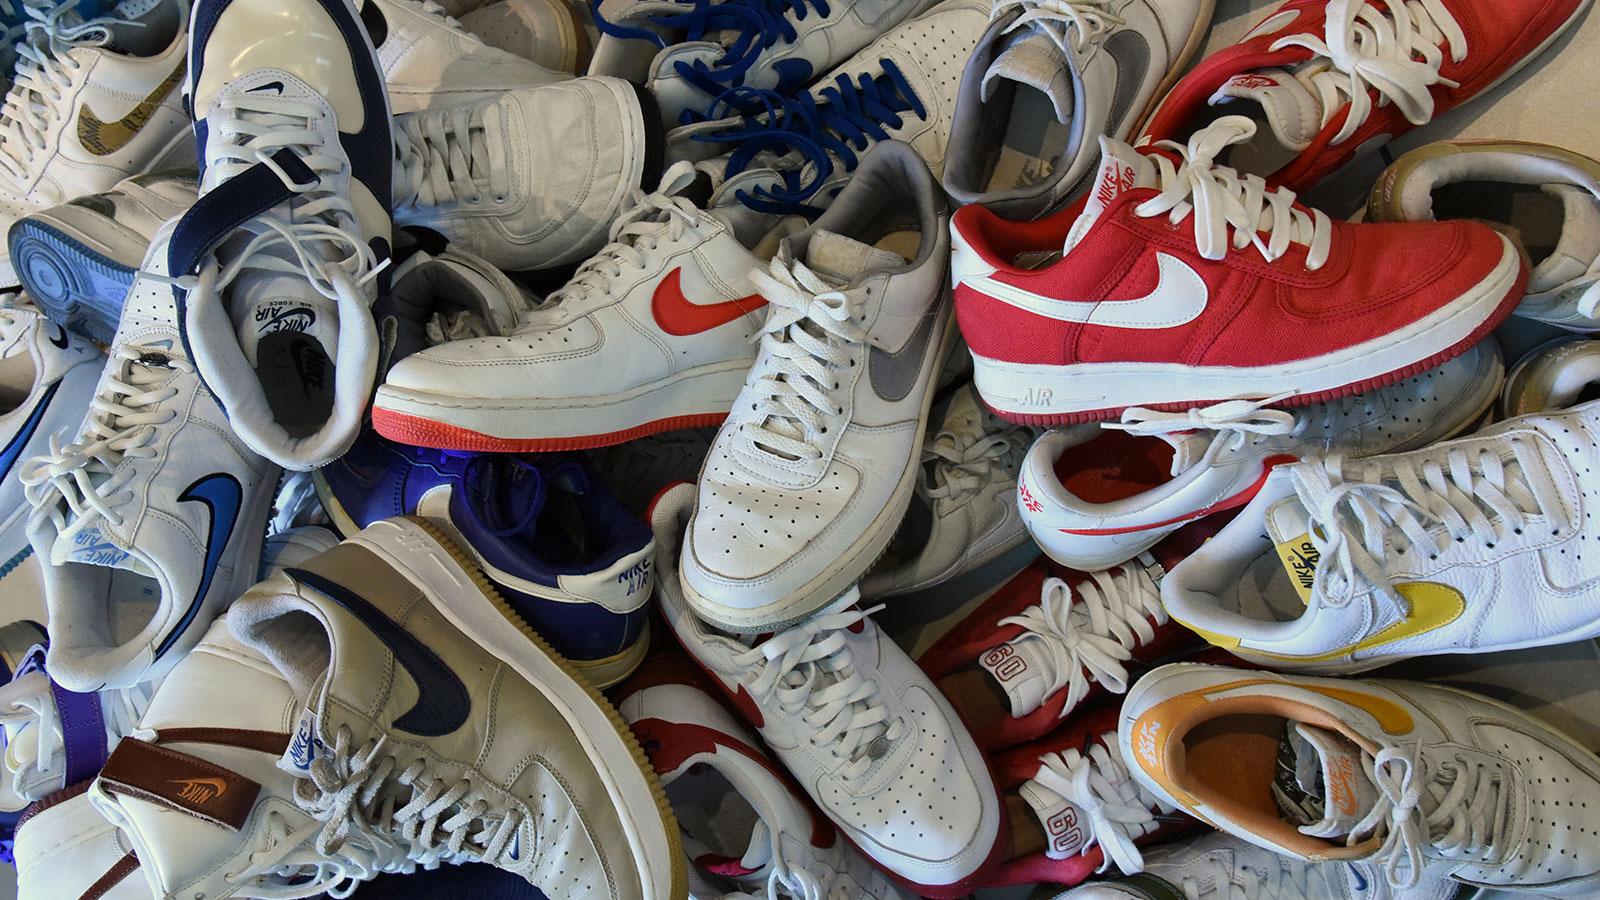 launches sneaker authentication service to combat counterfeit